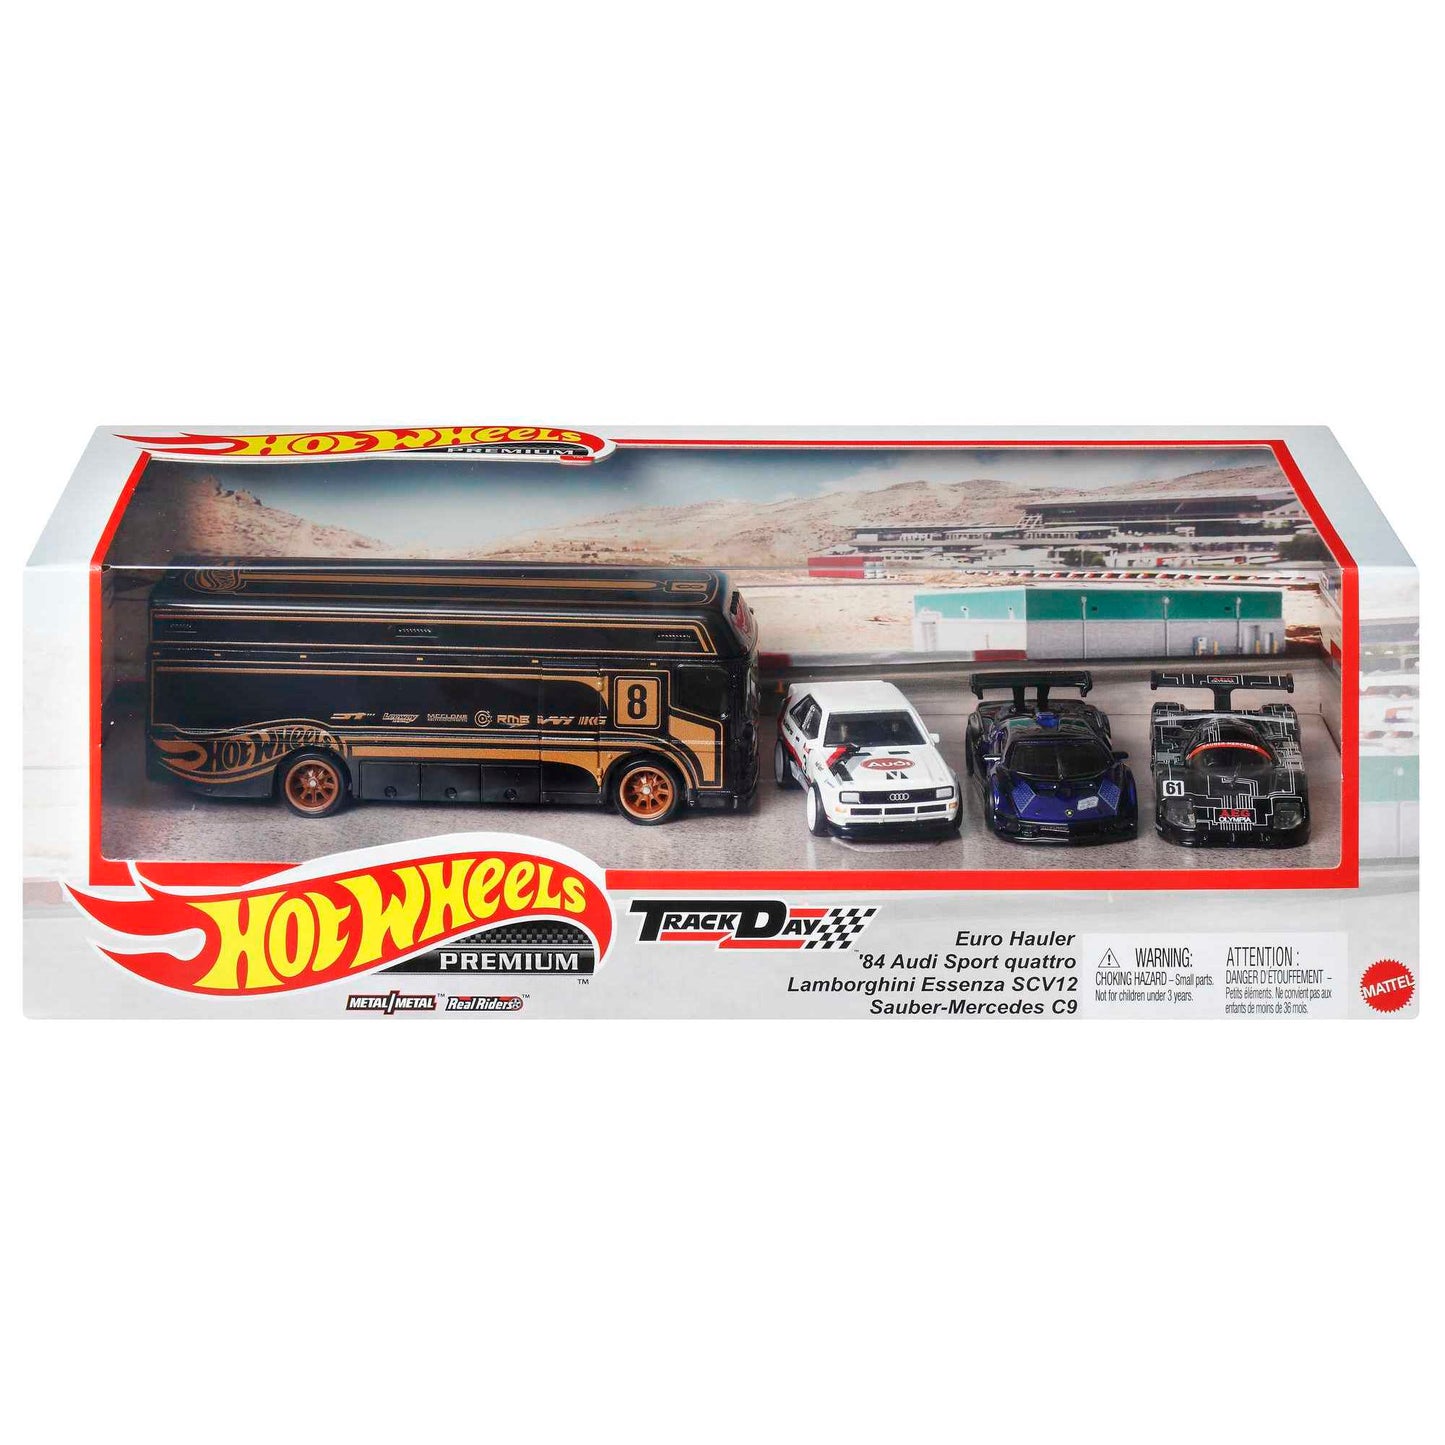 Hot Wheels Premium Collector Display Sets - Assorted*